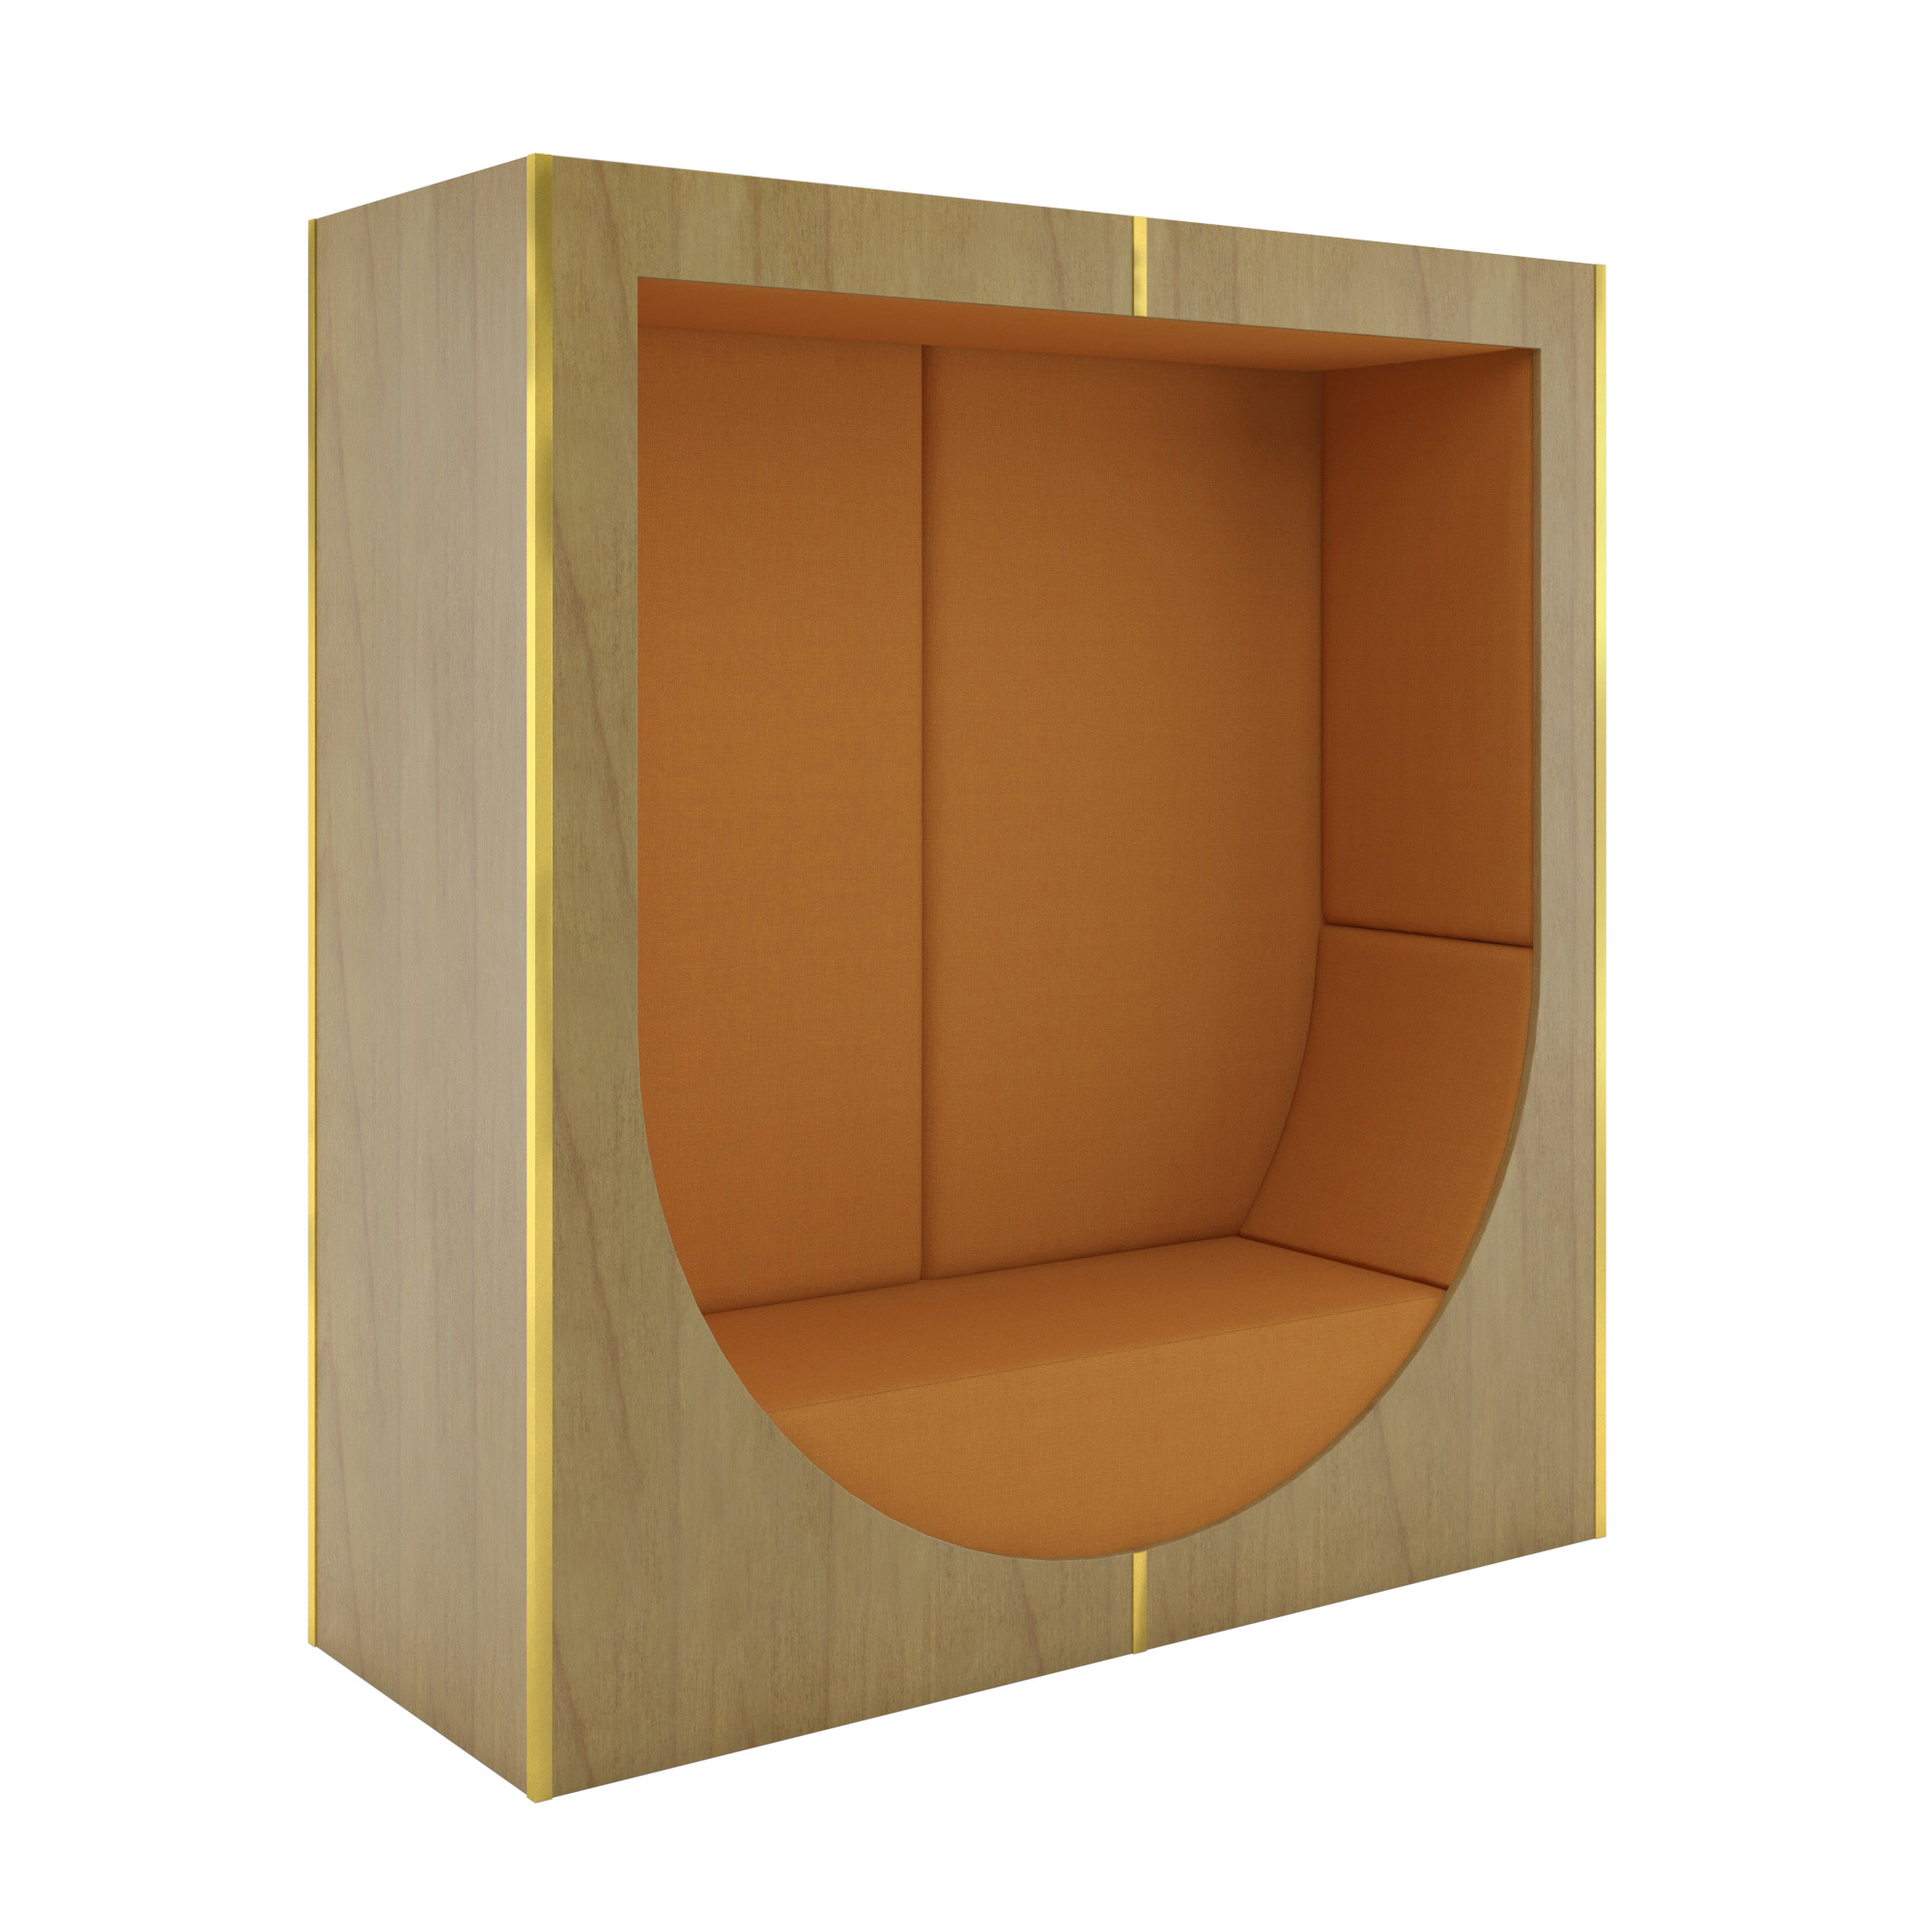 Echo seating pod nook with laminate and upholstered seat